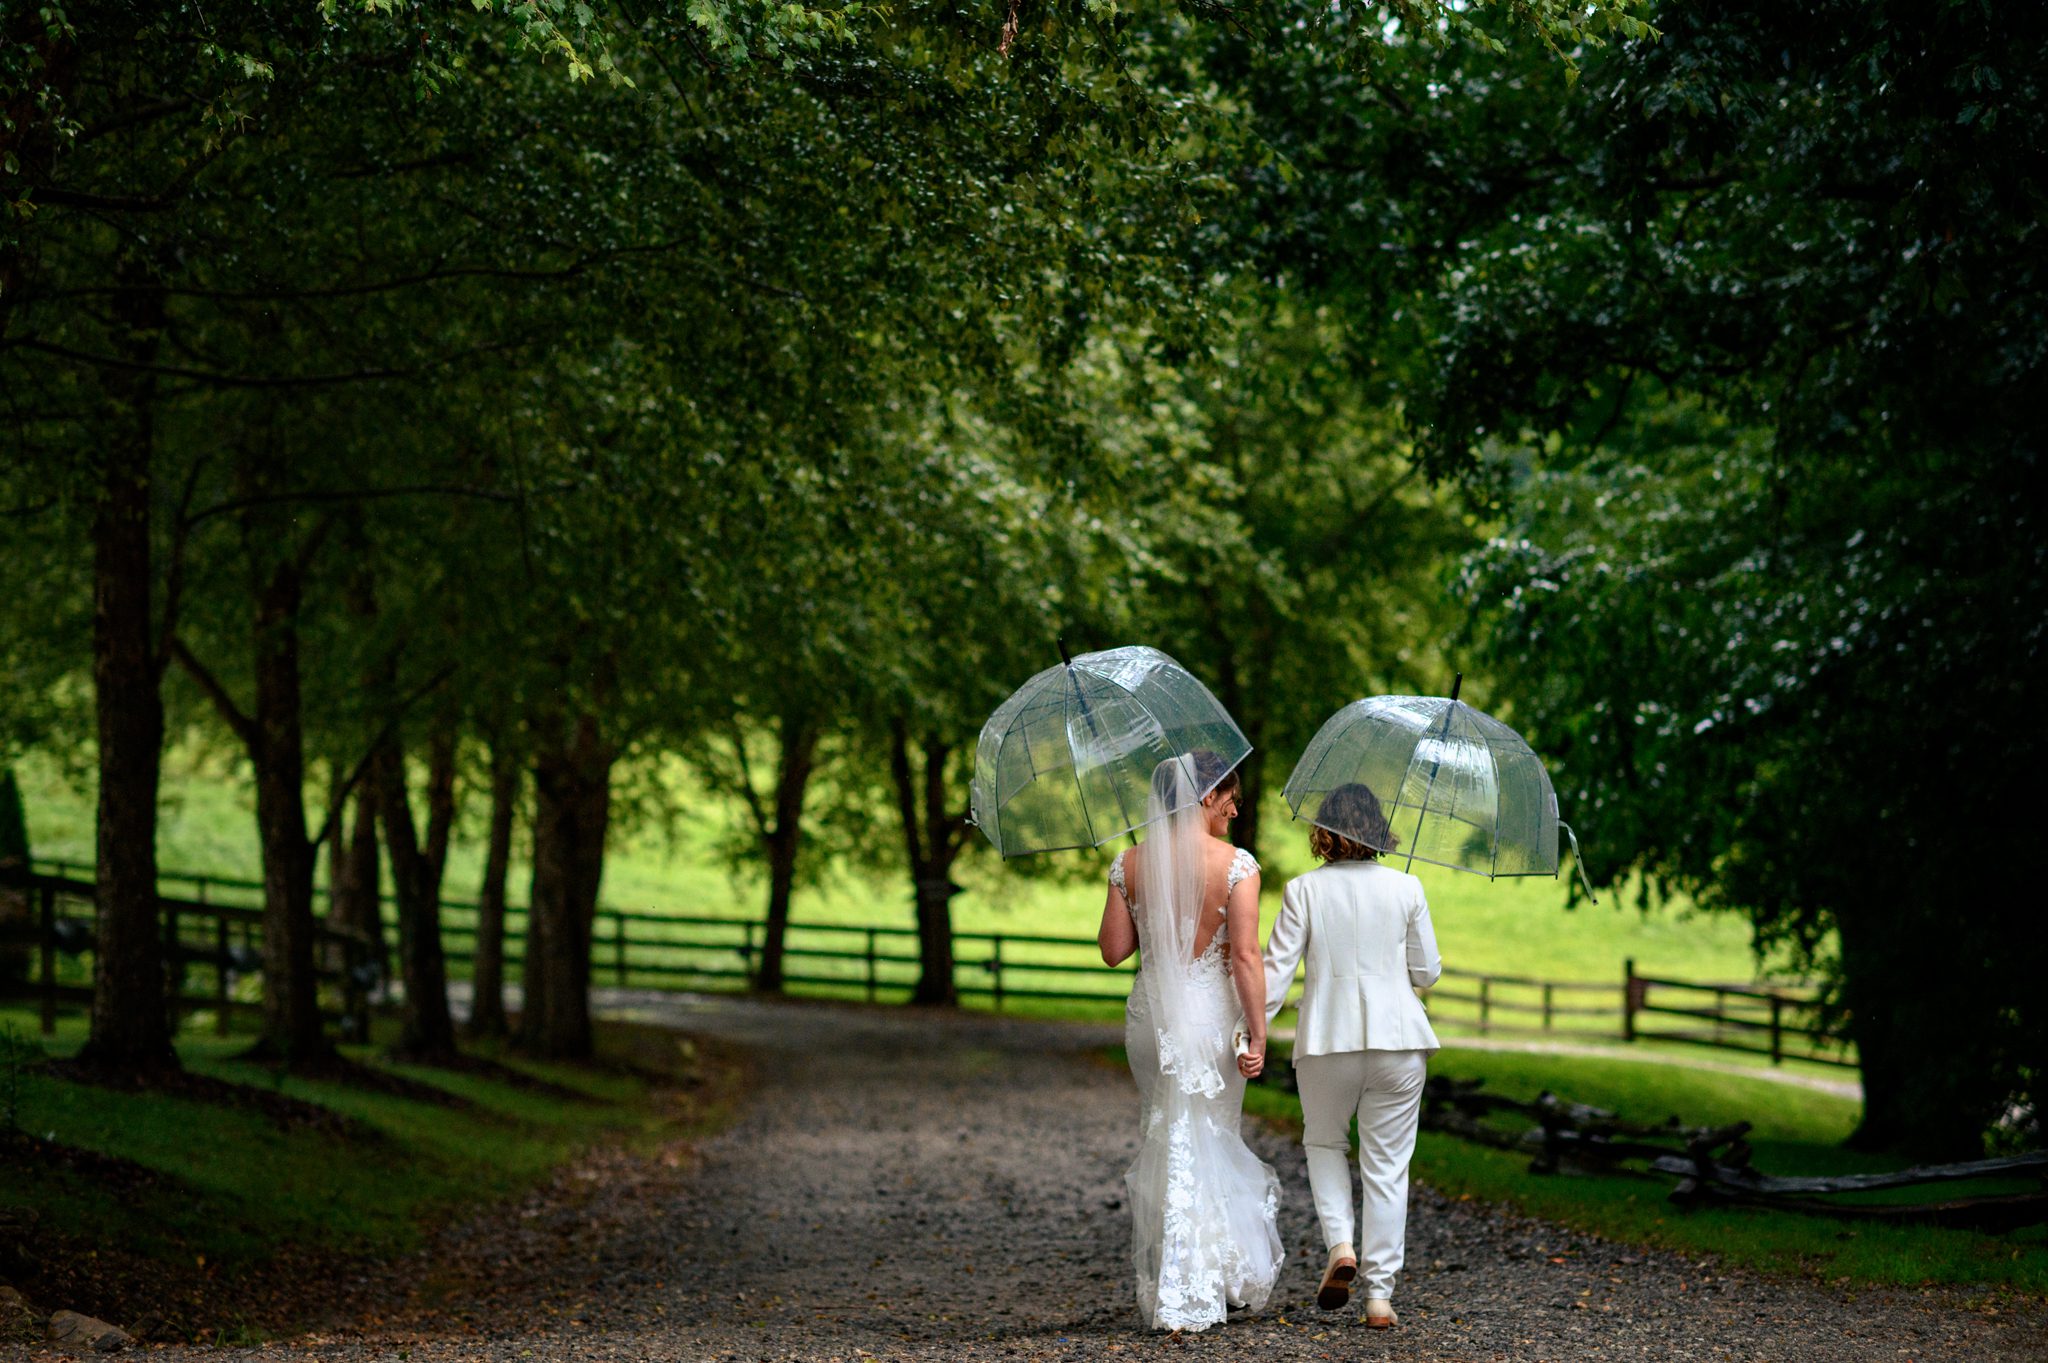 Two brides with clear umbrellas strolling down a scenic lane at The Farm, a rustic wedding venue in Candler, NC